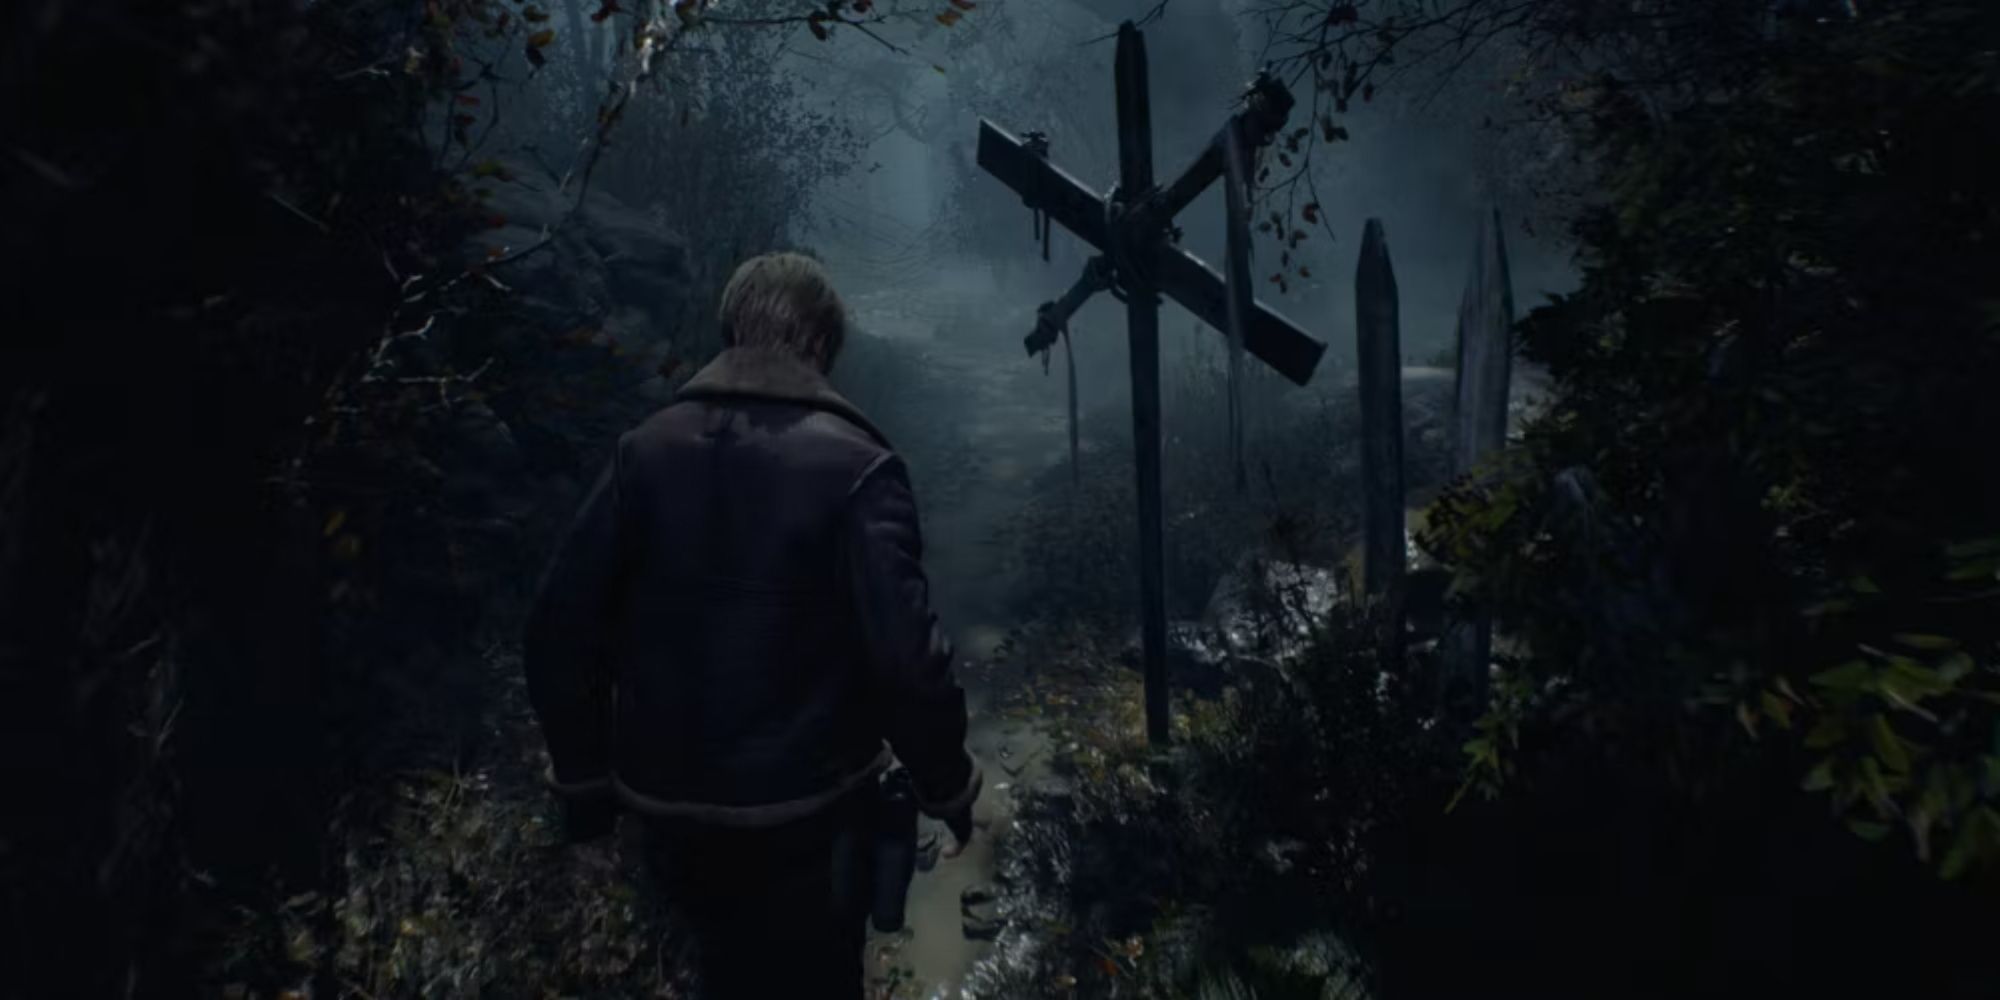 The starting area for Resident Evil 4 Remake, with Leon walking by an Iluminados cross into blue misty woods.